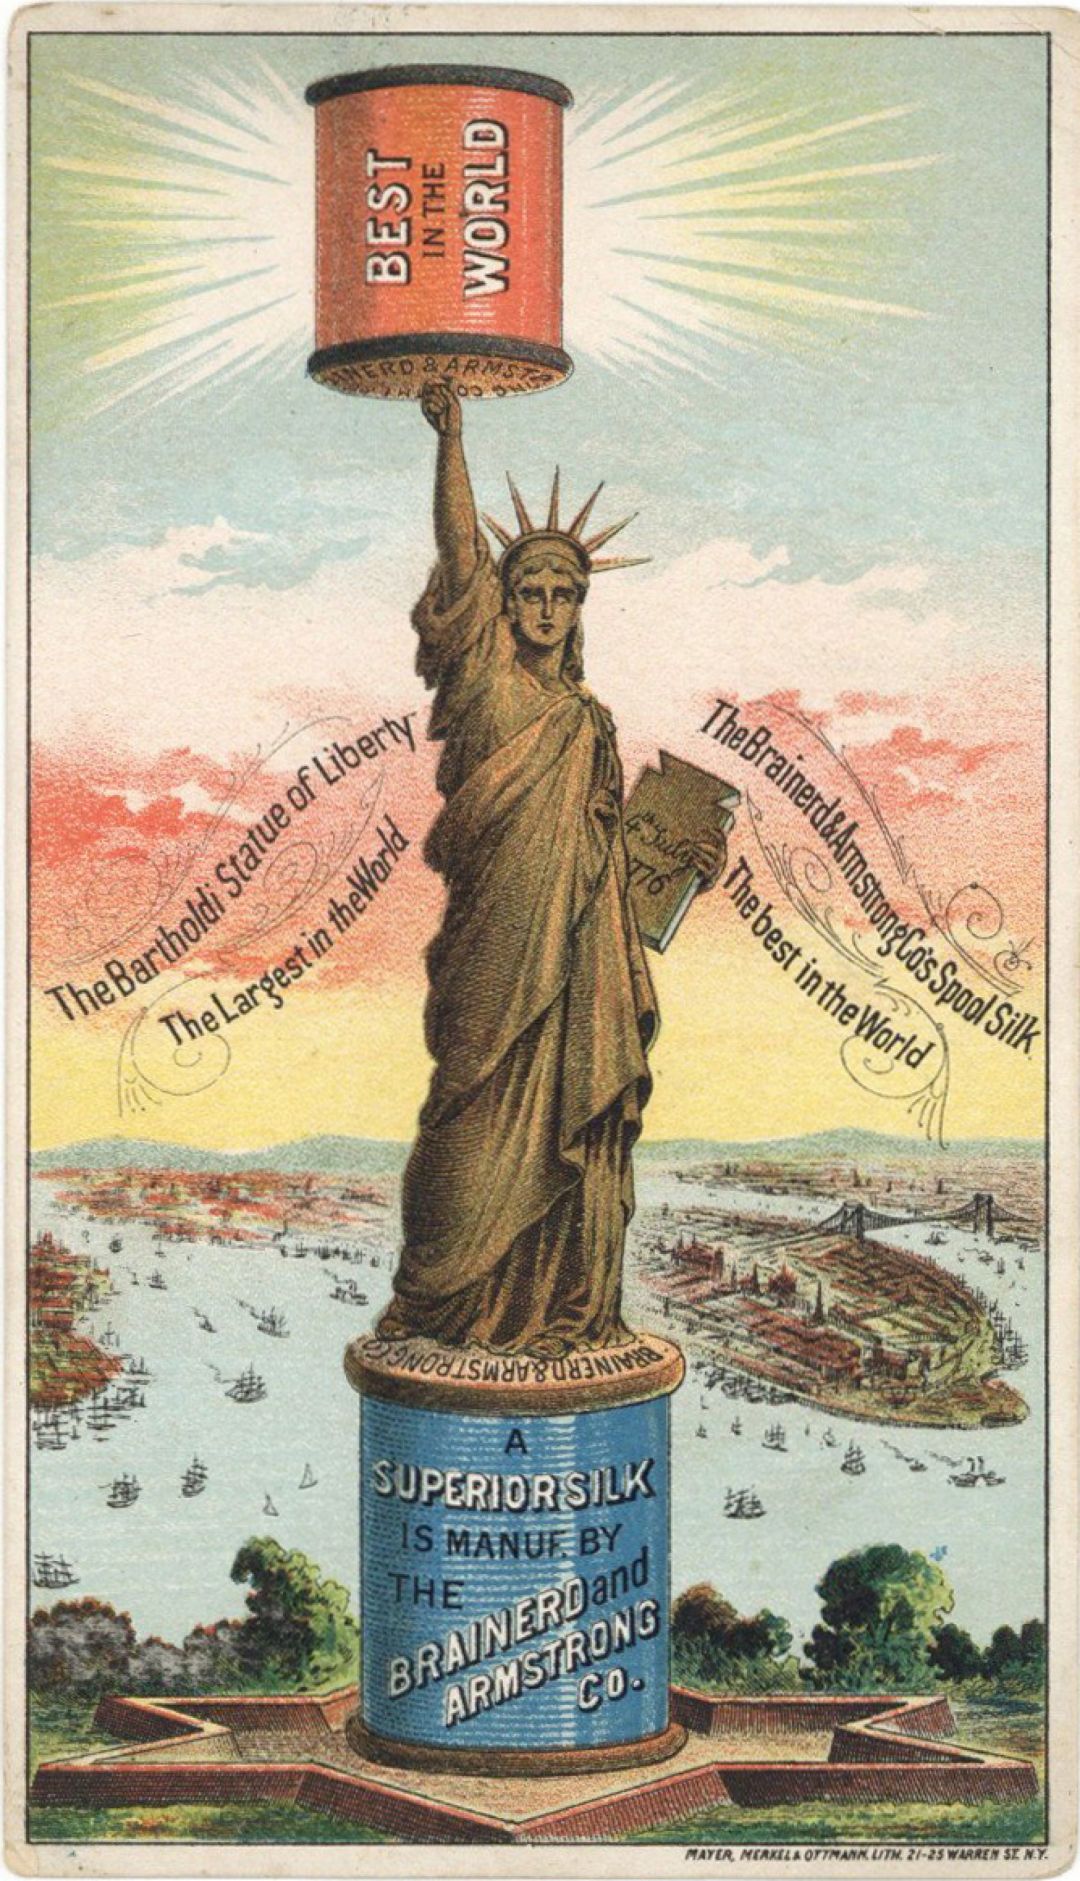 Brainerd and Armstrong Co. Trade Card - Americana